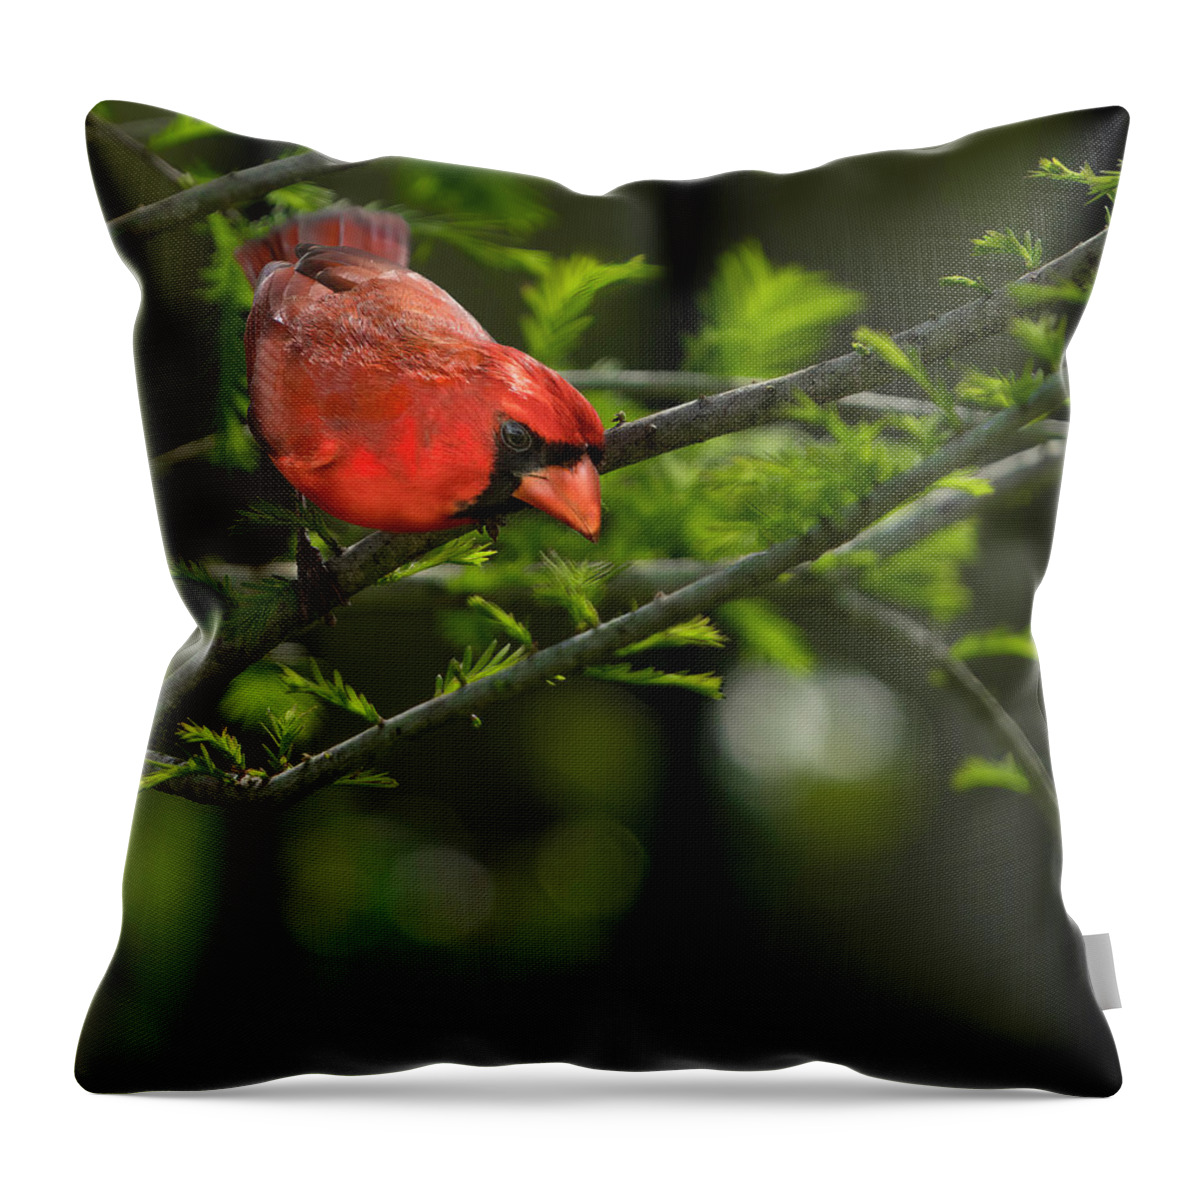 Birds Throw Pillow featuring the photograph Male Cardinal by Larry Marshall